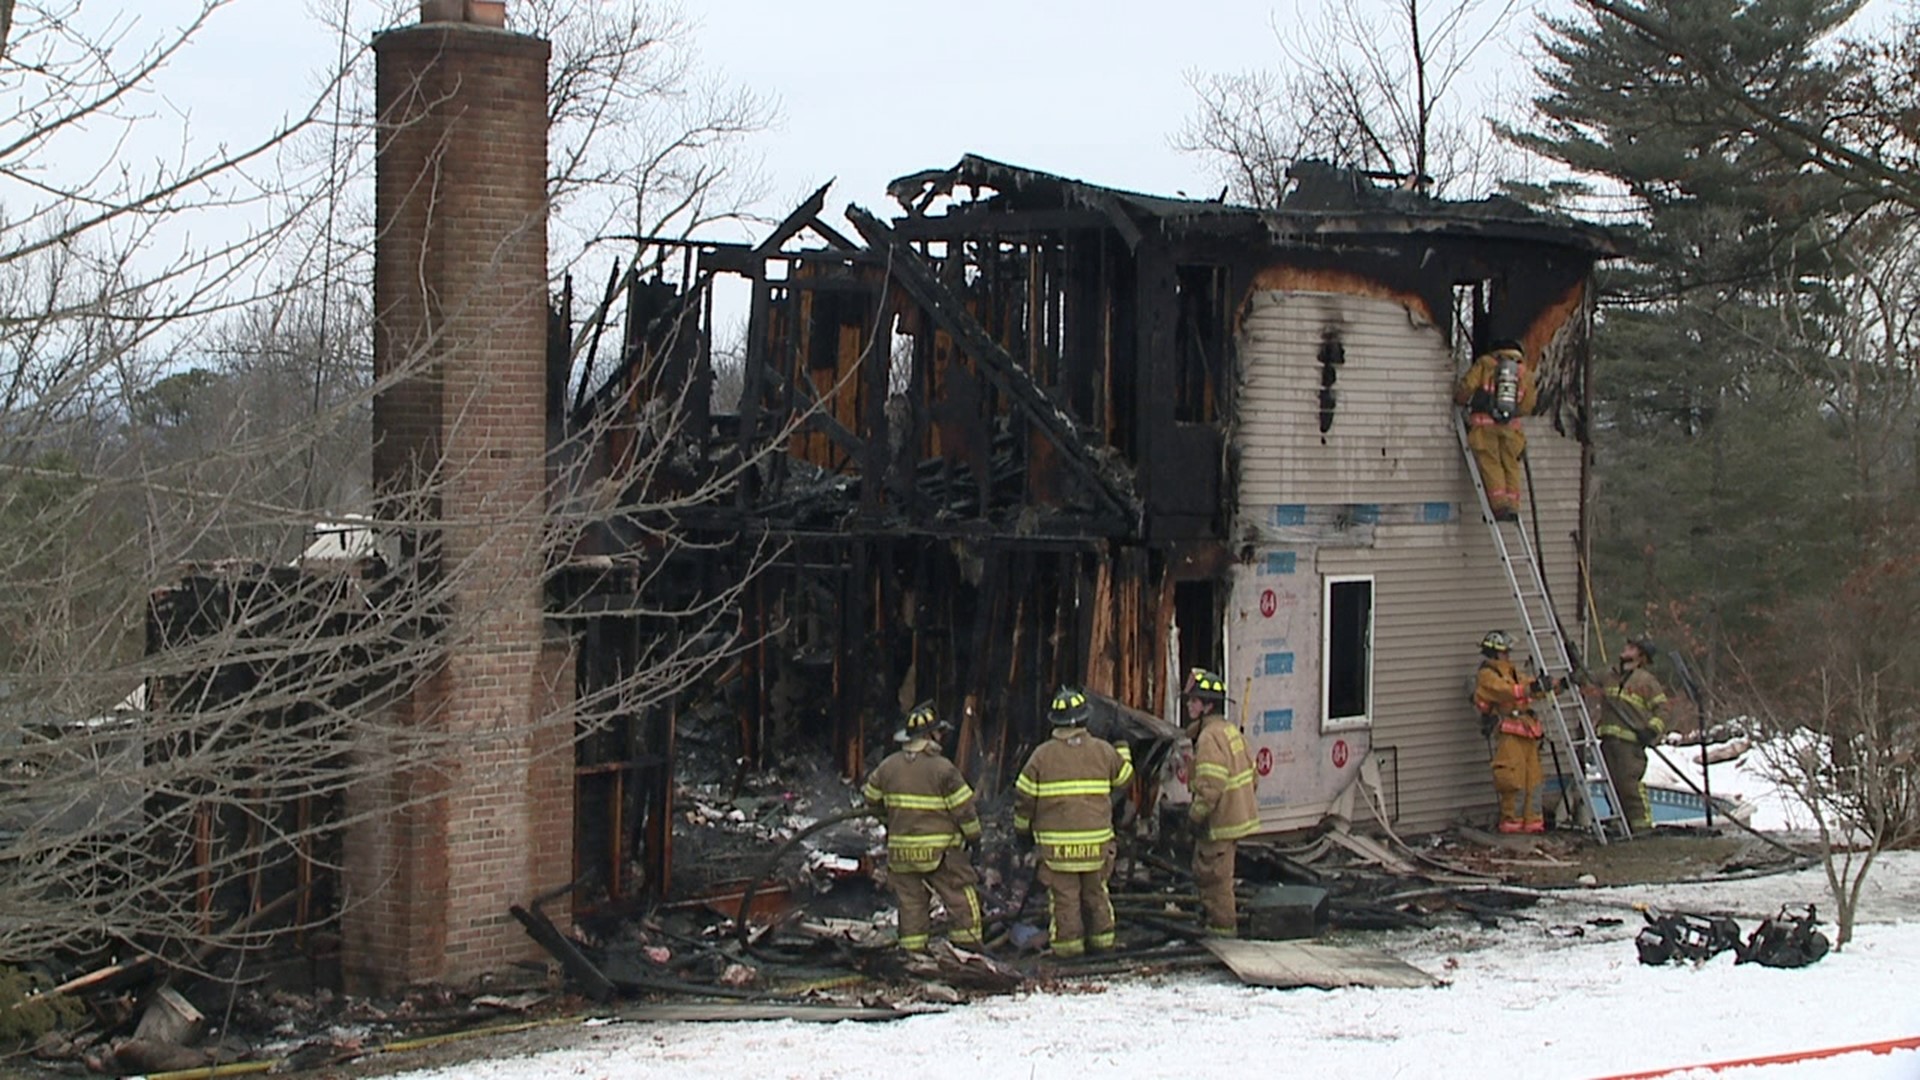 Flames broke out around 11 a.m. Sunday morning at a home in Blue Mountain Heights near Schuylkill Haven.